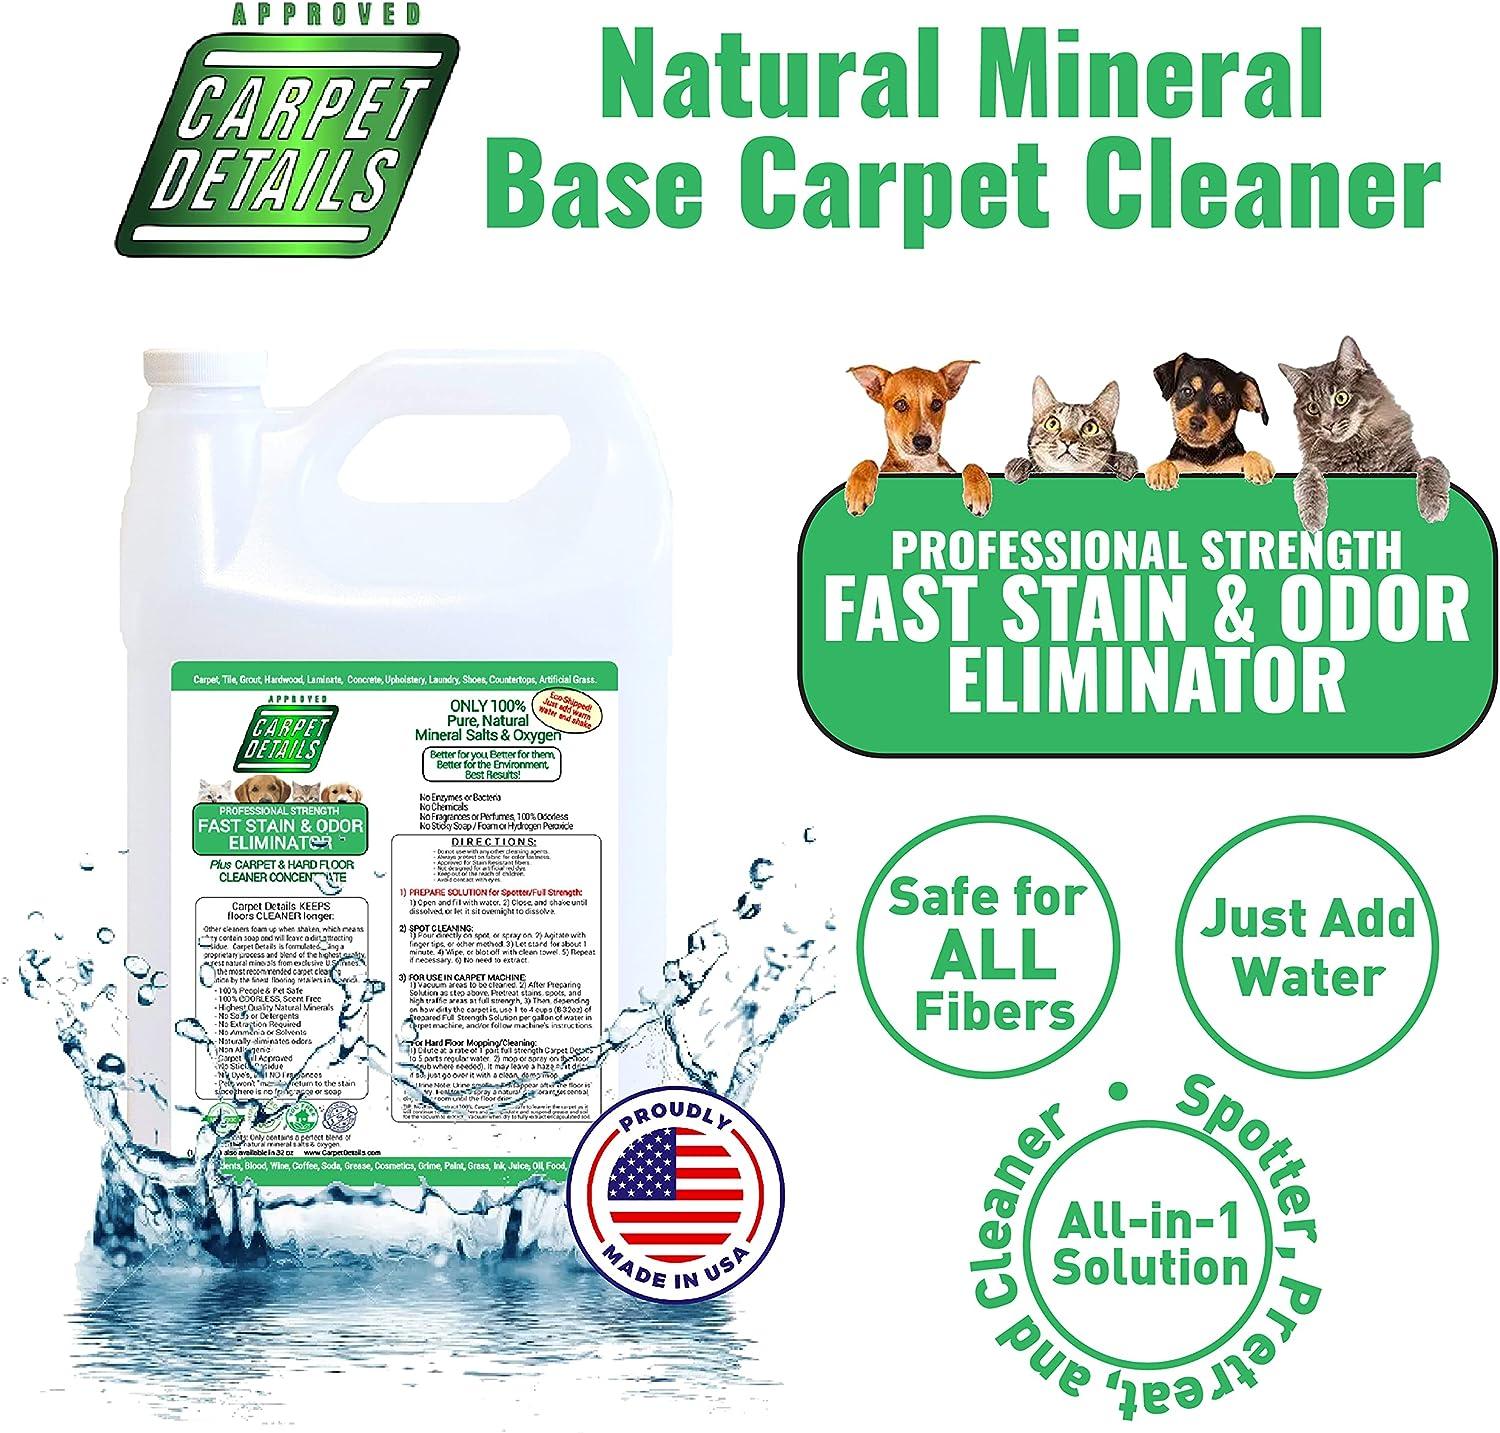 Carpet Details Carpet Stain Remover- Safe Natural Mineral Based Carpet  Cleaner Solution- Use on Tile, Grout, Laminate and Wood Floors, and Carpet-  Perfect Pet Carpet Cleaner- Gallon- Made in the USA 1